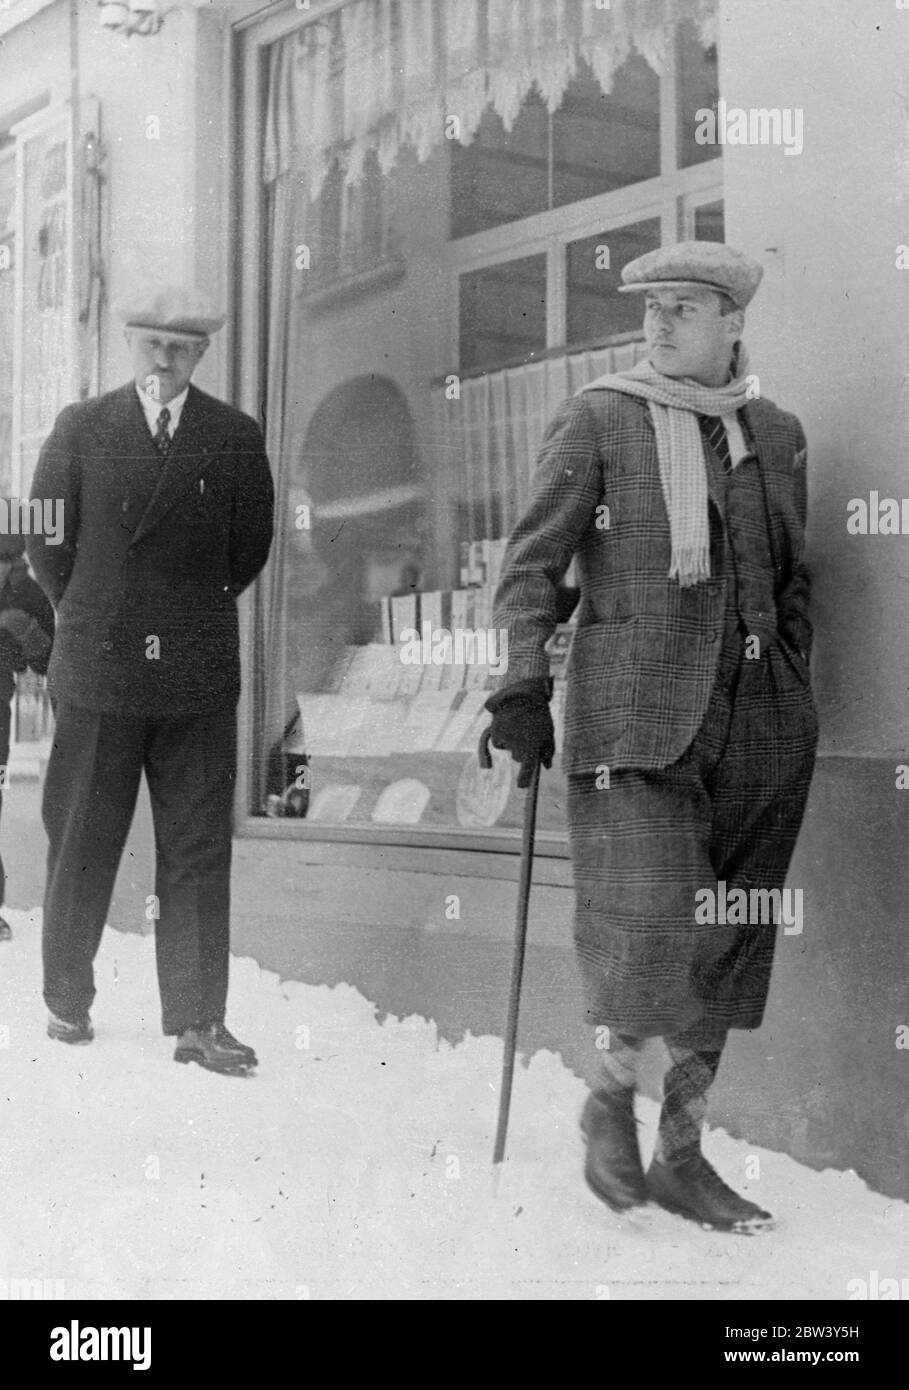 Young King of Egypt spends winter sports Holiday at St Moritz . The young King Farouk of Egypt , accompanied by his mother and sisters , is spending a winter sports holiday at St Moritz , Switzerland , before travelling to England for the Coronation . Photo shows , King Farouk , in plus fours , walking through the snow at St Moritz . 9 March 1937 Stock Photo